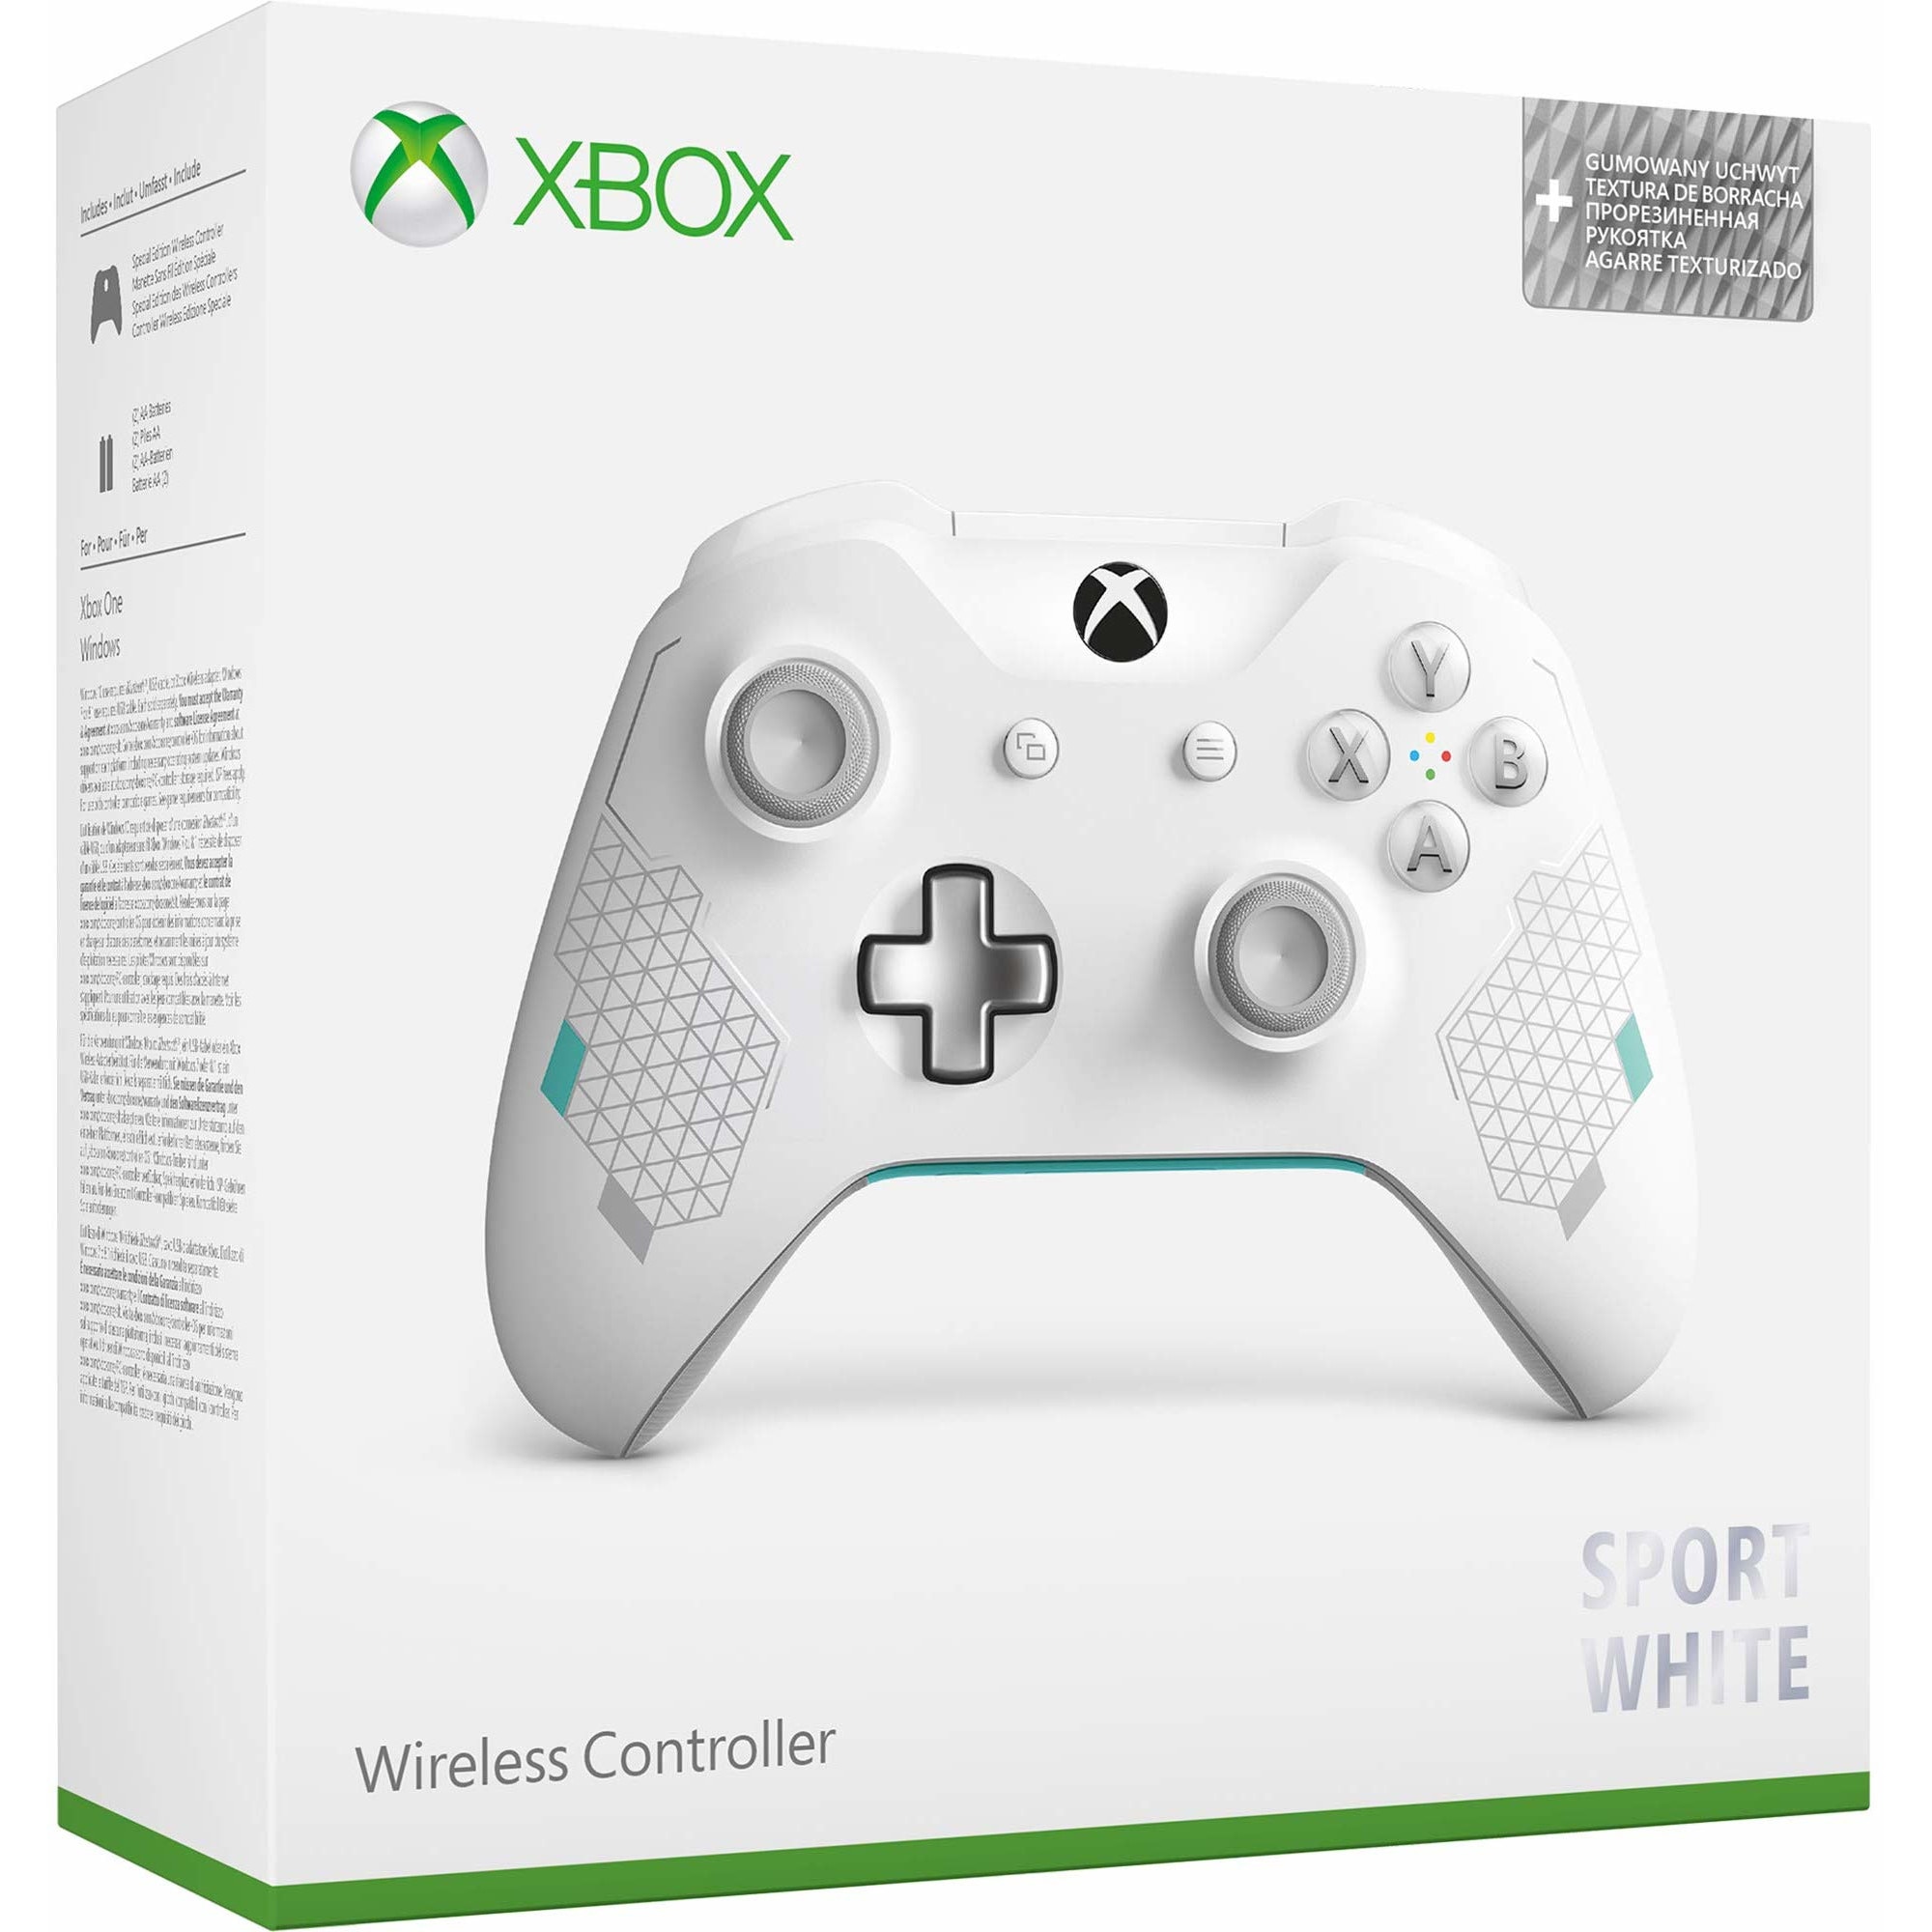 Motel freezer Sprout Controller Xbox One S Wireless- Sport White Special Edition - eMAG.ro